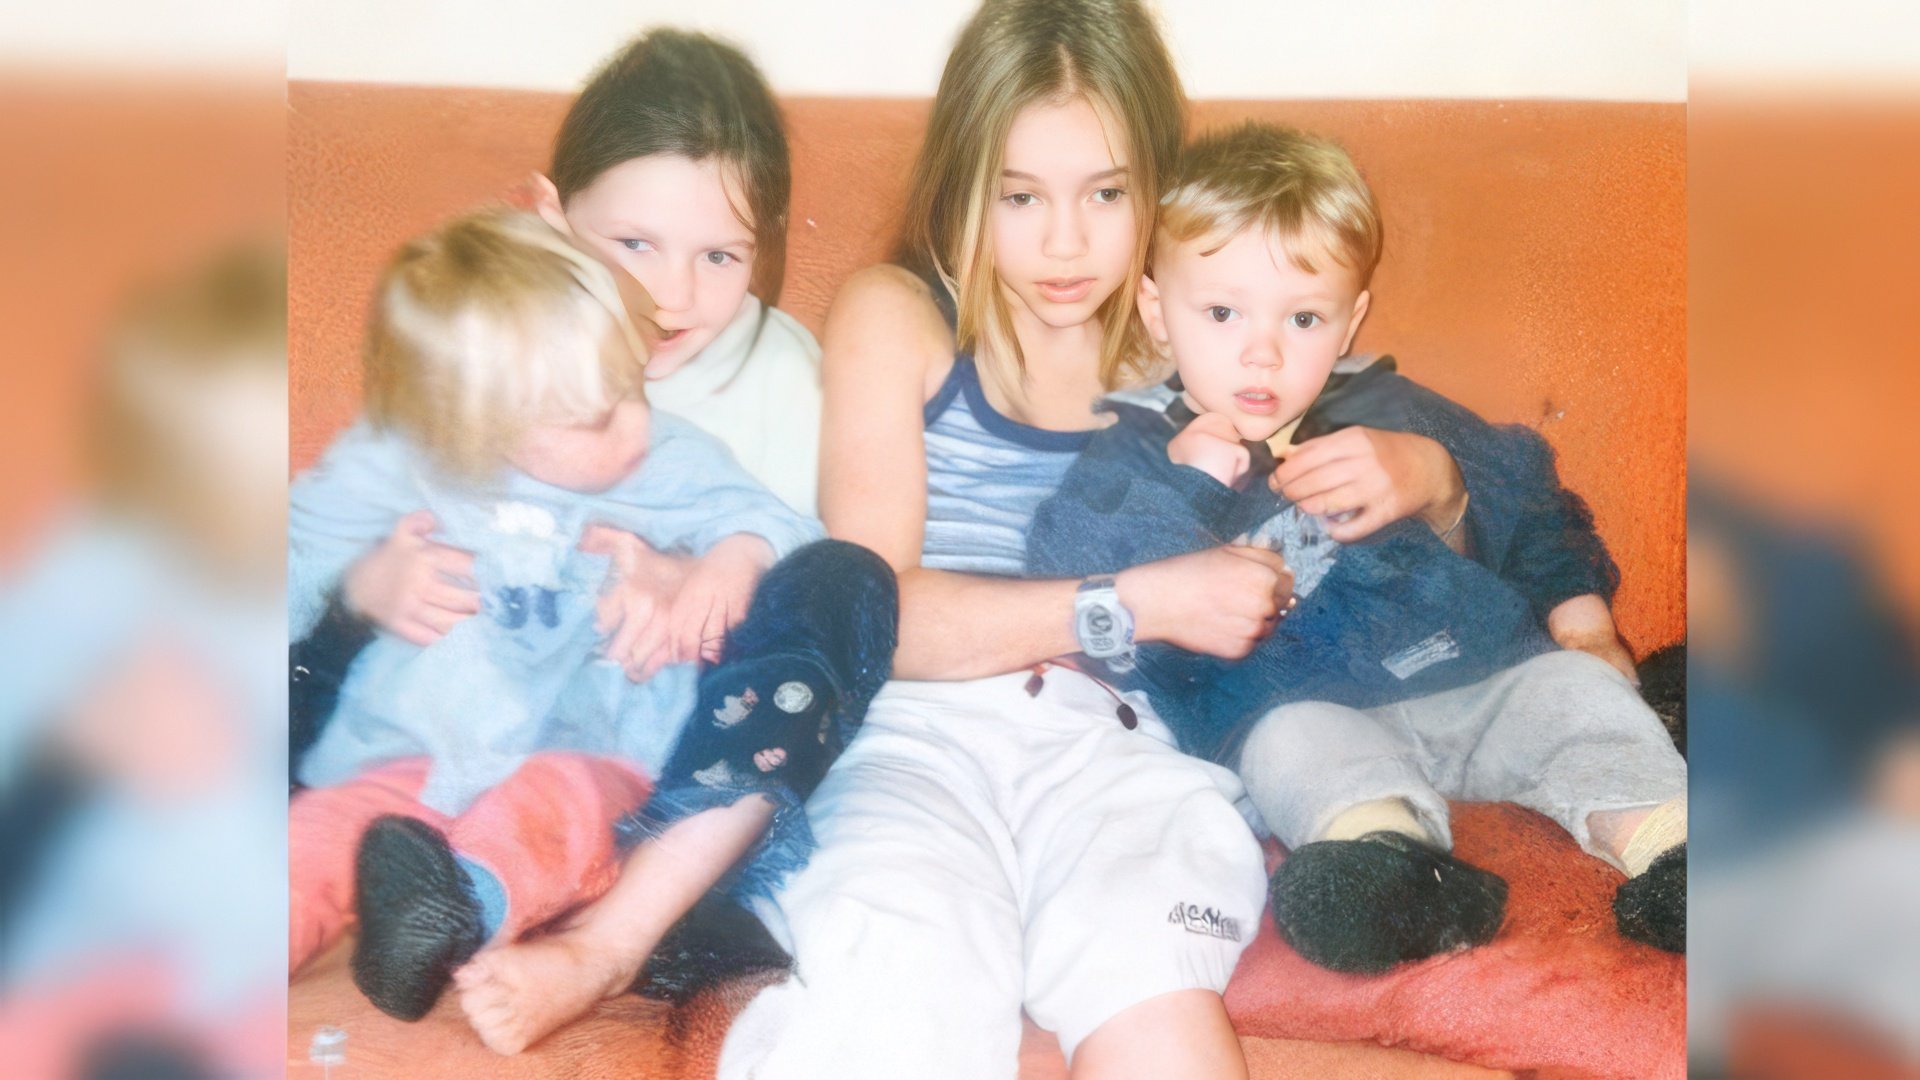 Child photo of Suki Waterhouse with sisters and brother